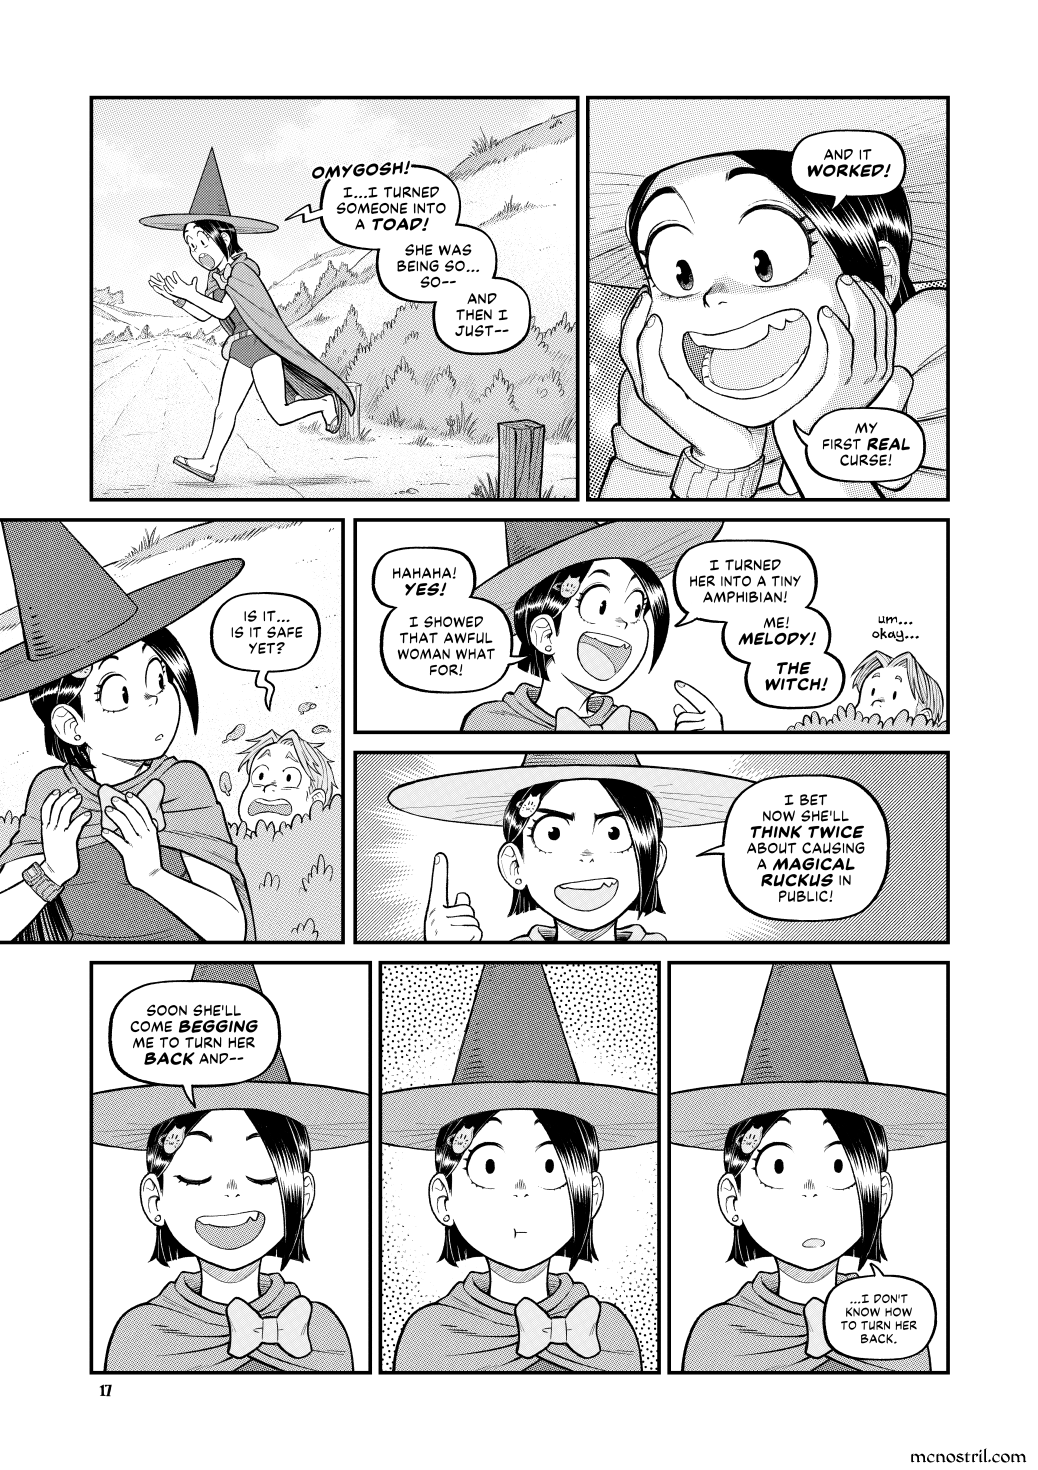 Melody is new so she does not know yet that wizards *are* magickal ruckuseseses. 